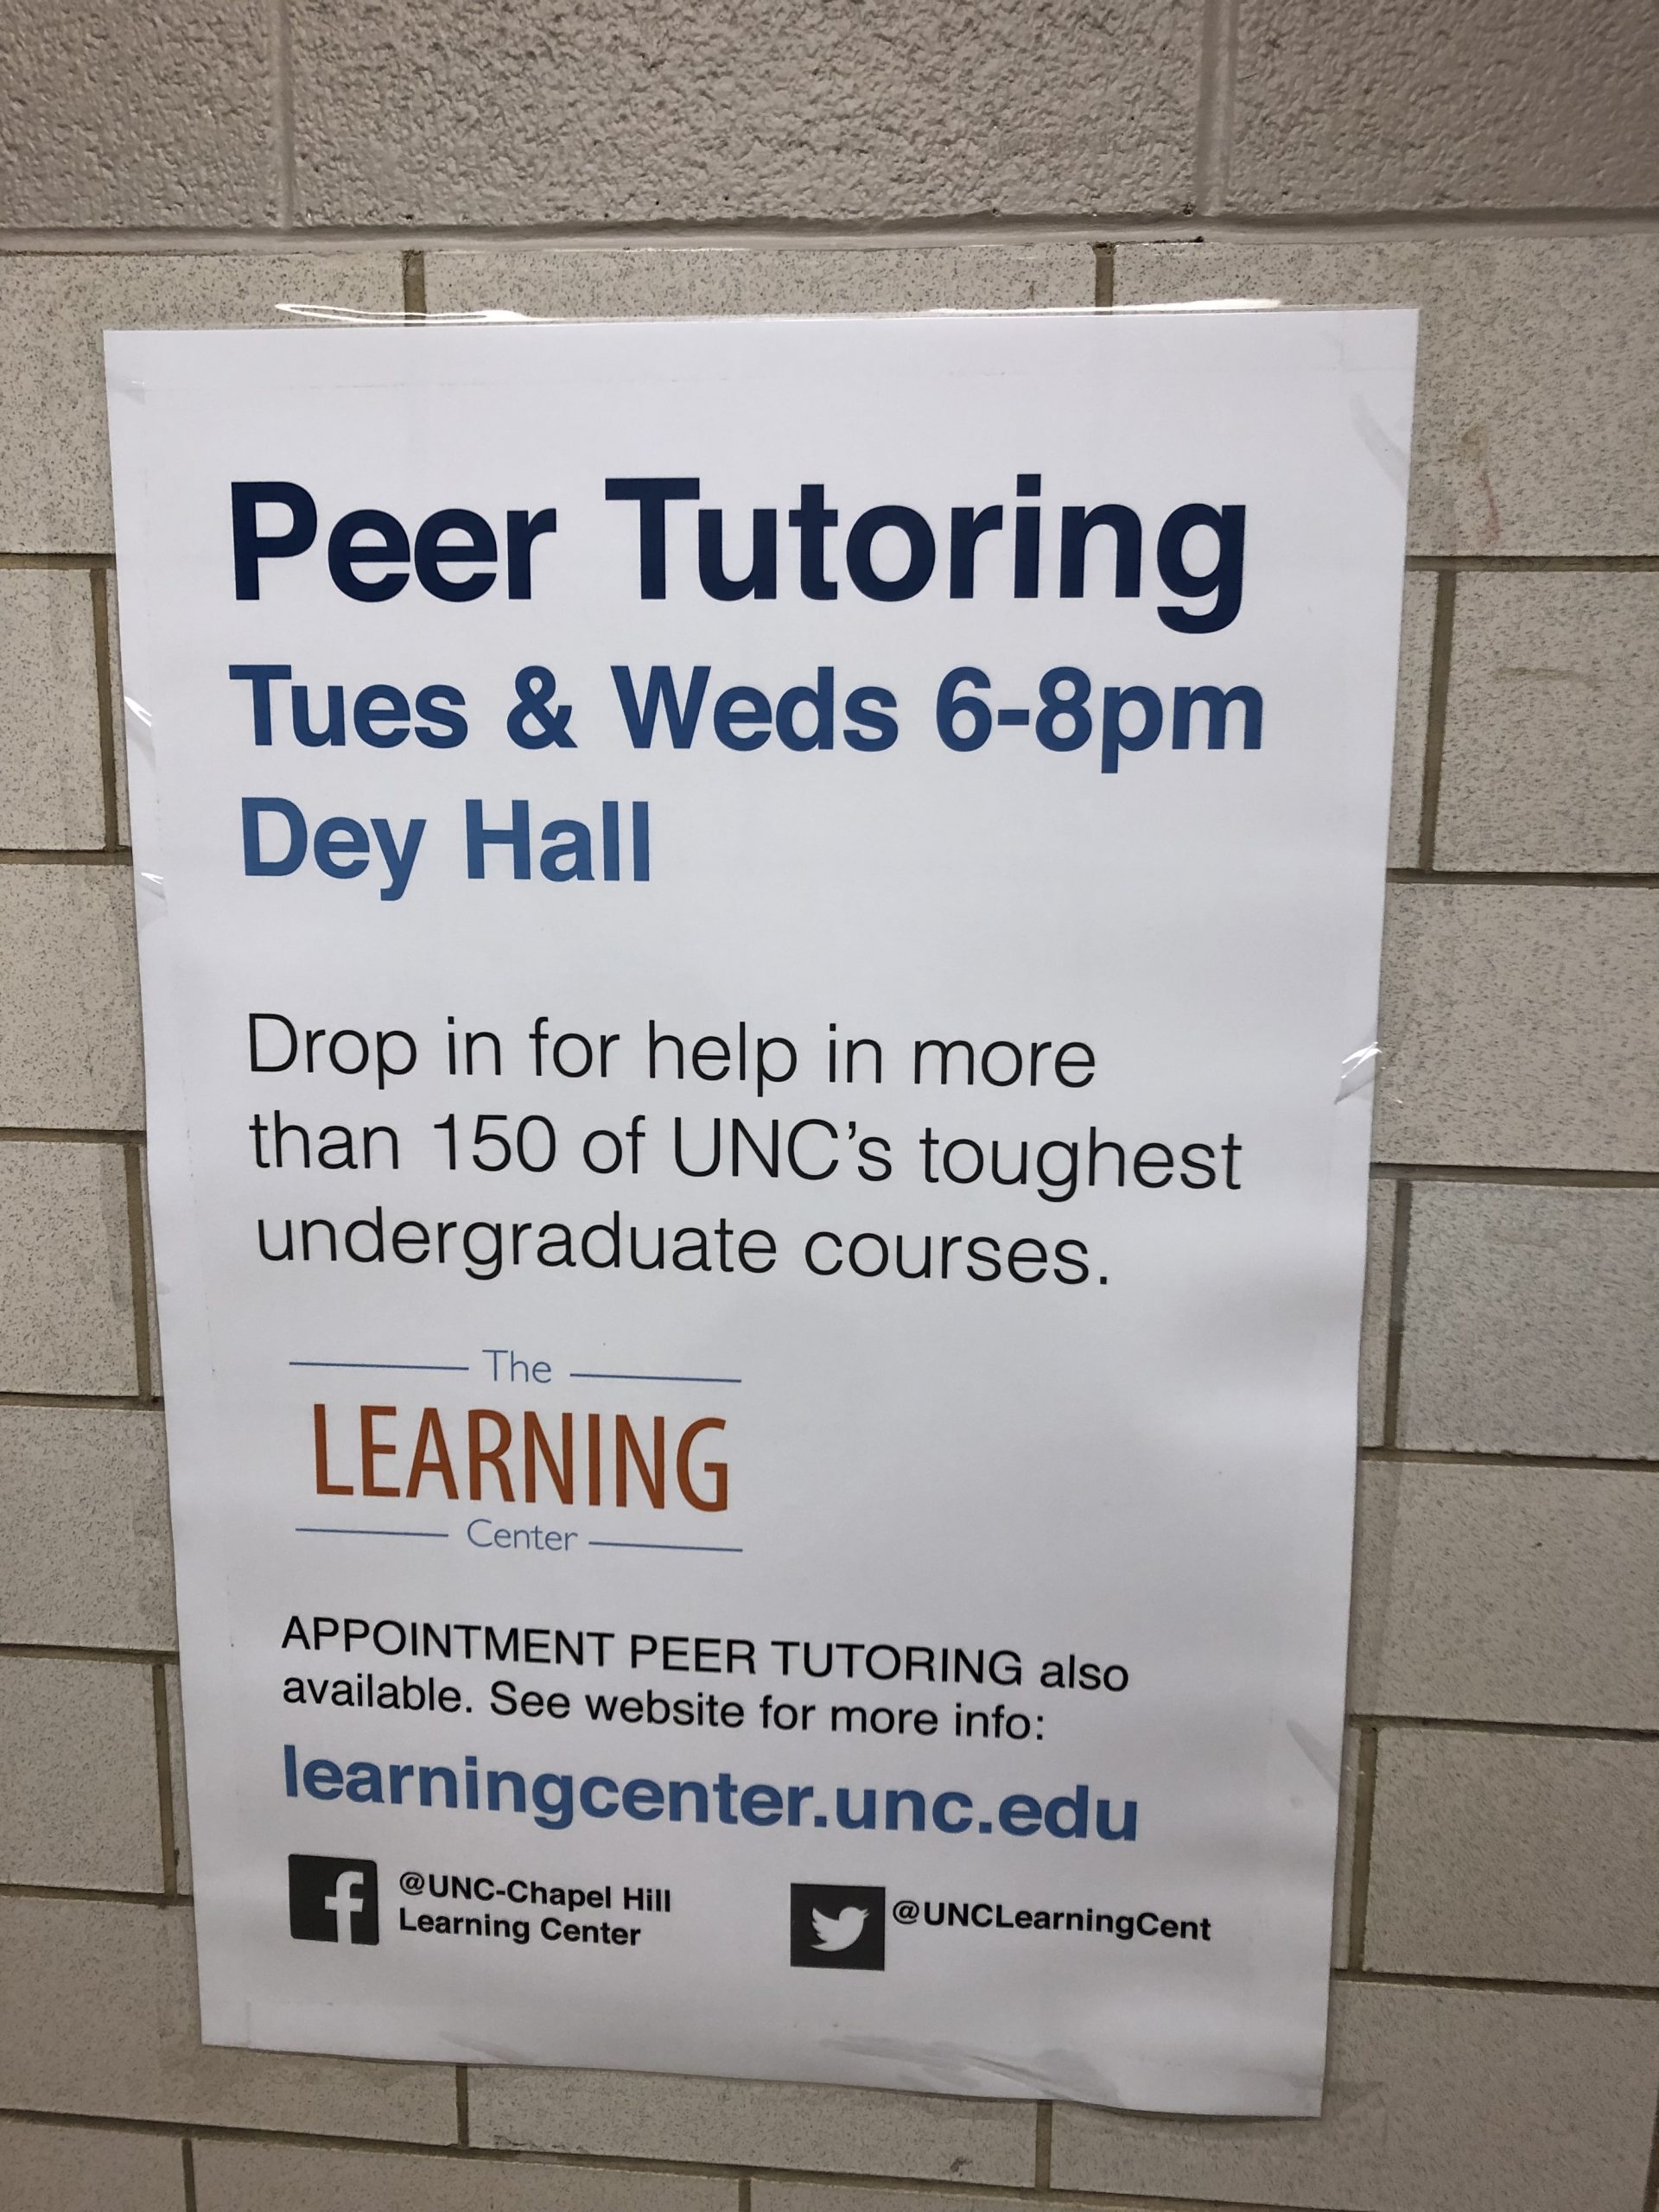 A white poster against a brick wall in Dey Hall. The poster advertises drop-in Peer Tutoring from 6-8 pm in Dey Hall every Tuesday and Wednesday. 